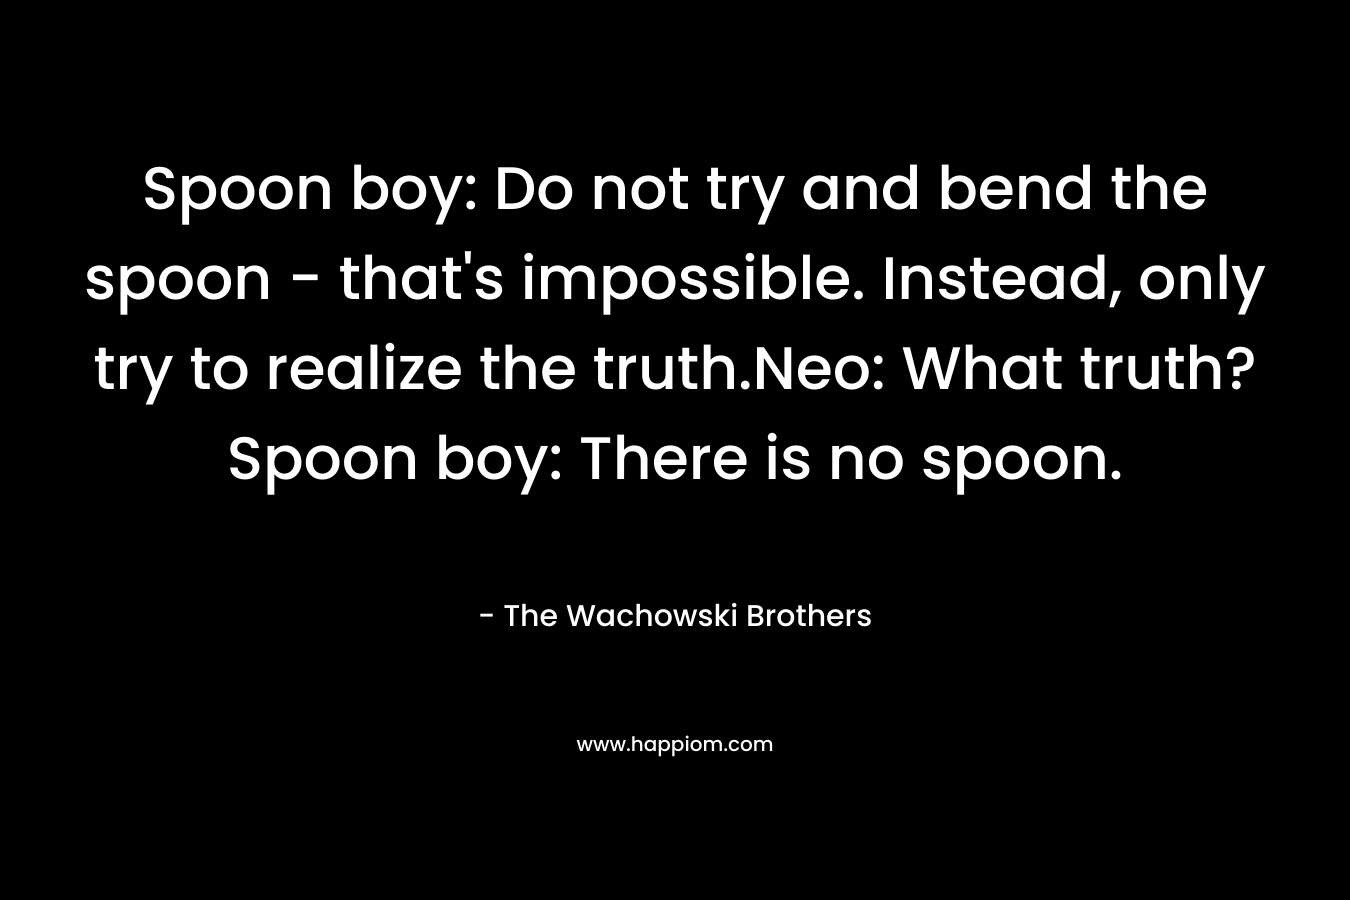 Spoon boy: Do not try and bend the spoon - that's impossible. Instead, only try to realize the truth.Neo: What truth?Spoon boy: There is no spoon.